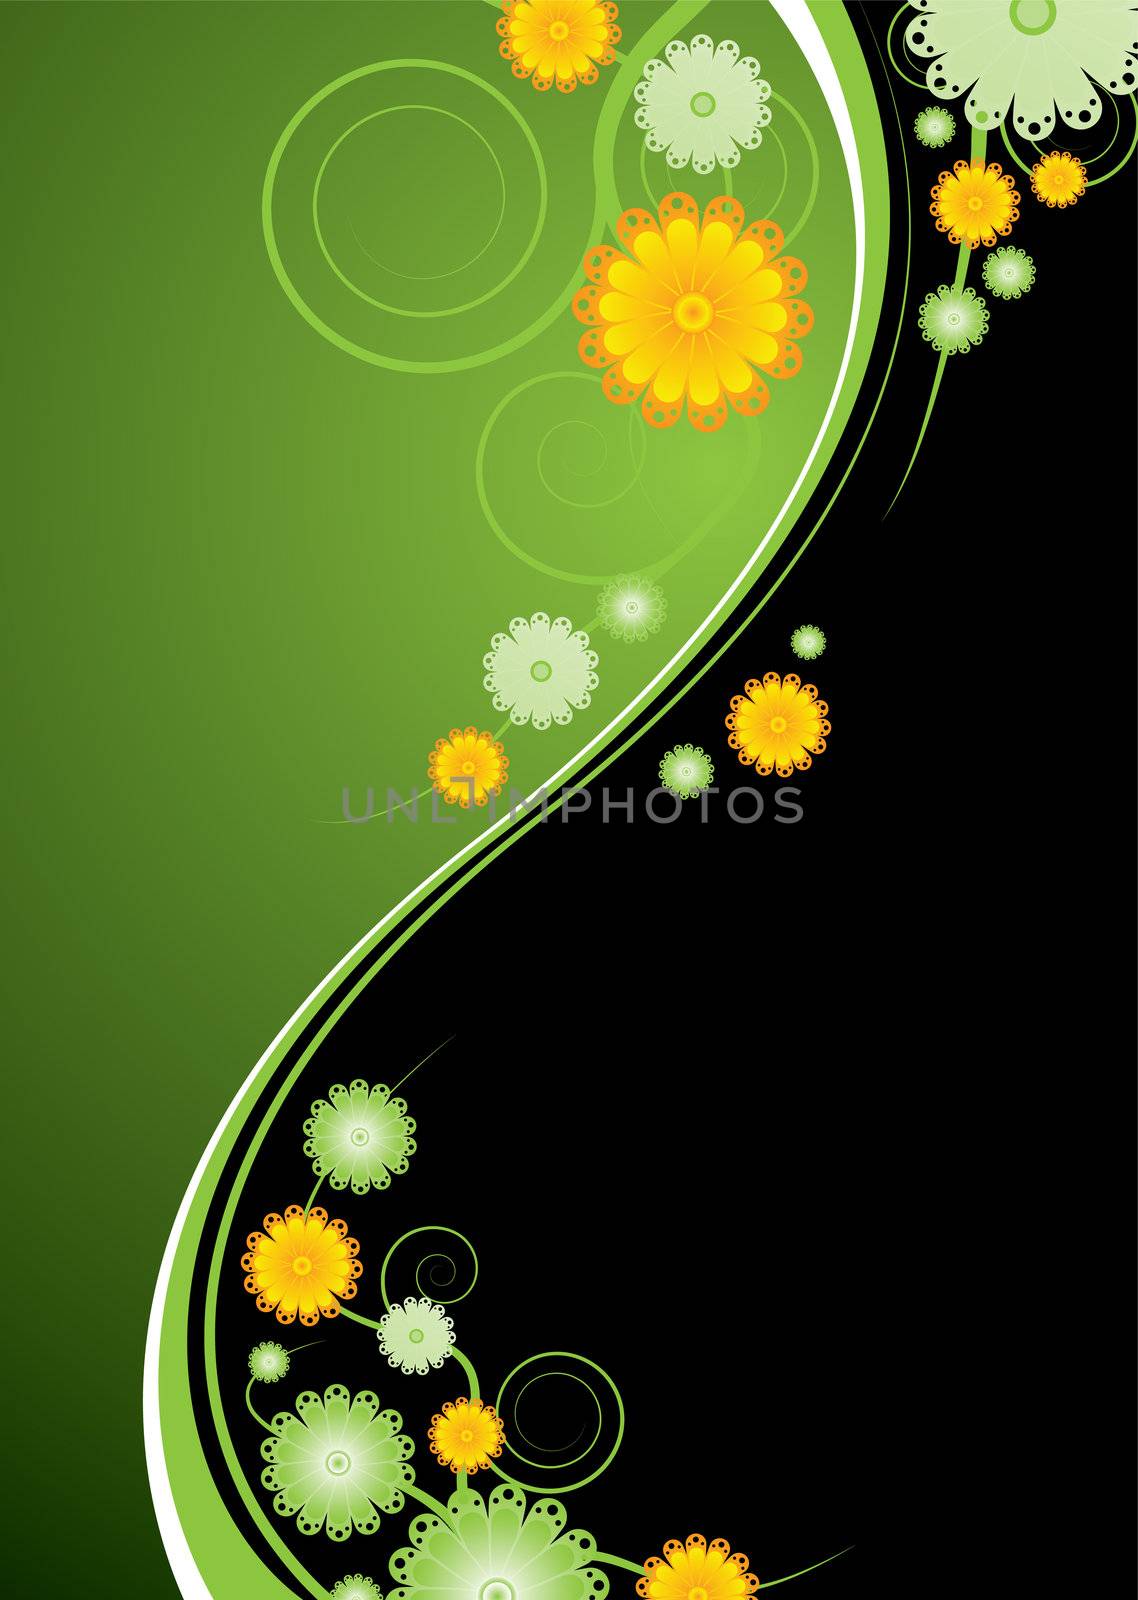 Green and black abstract background with gloral elements and vines